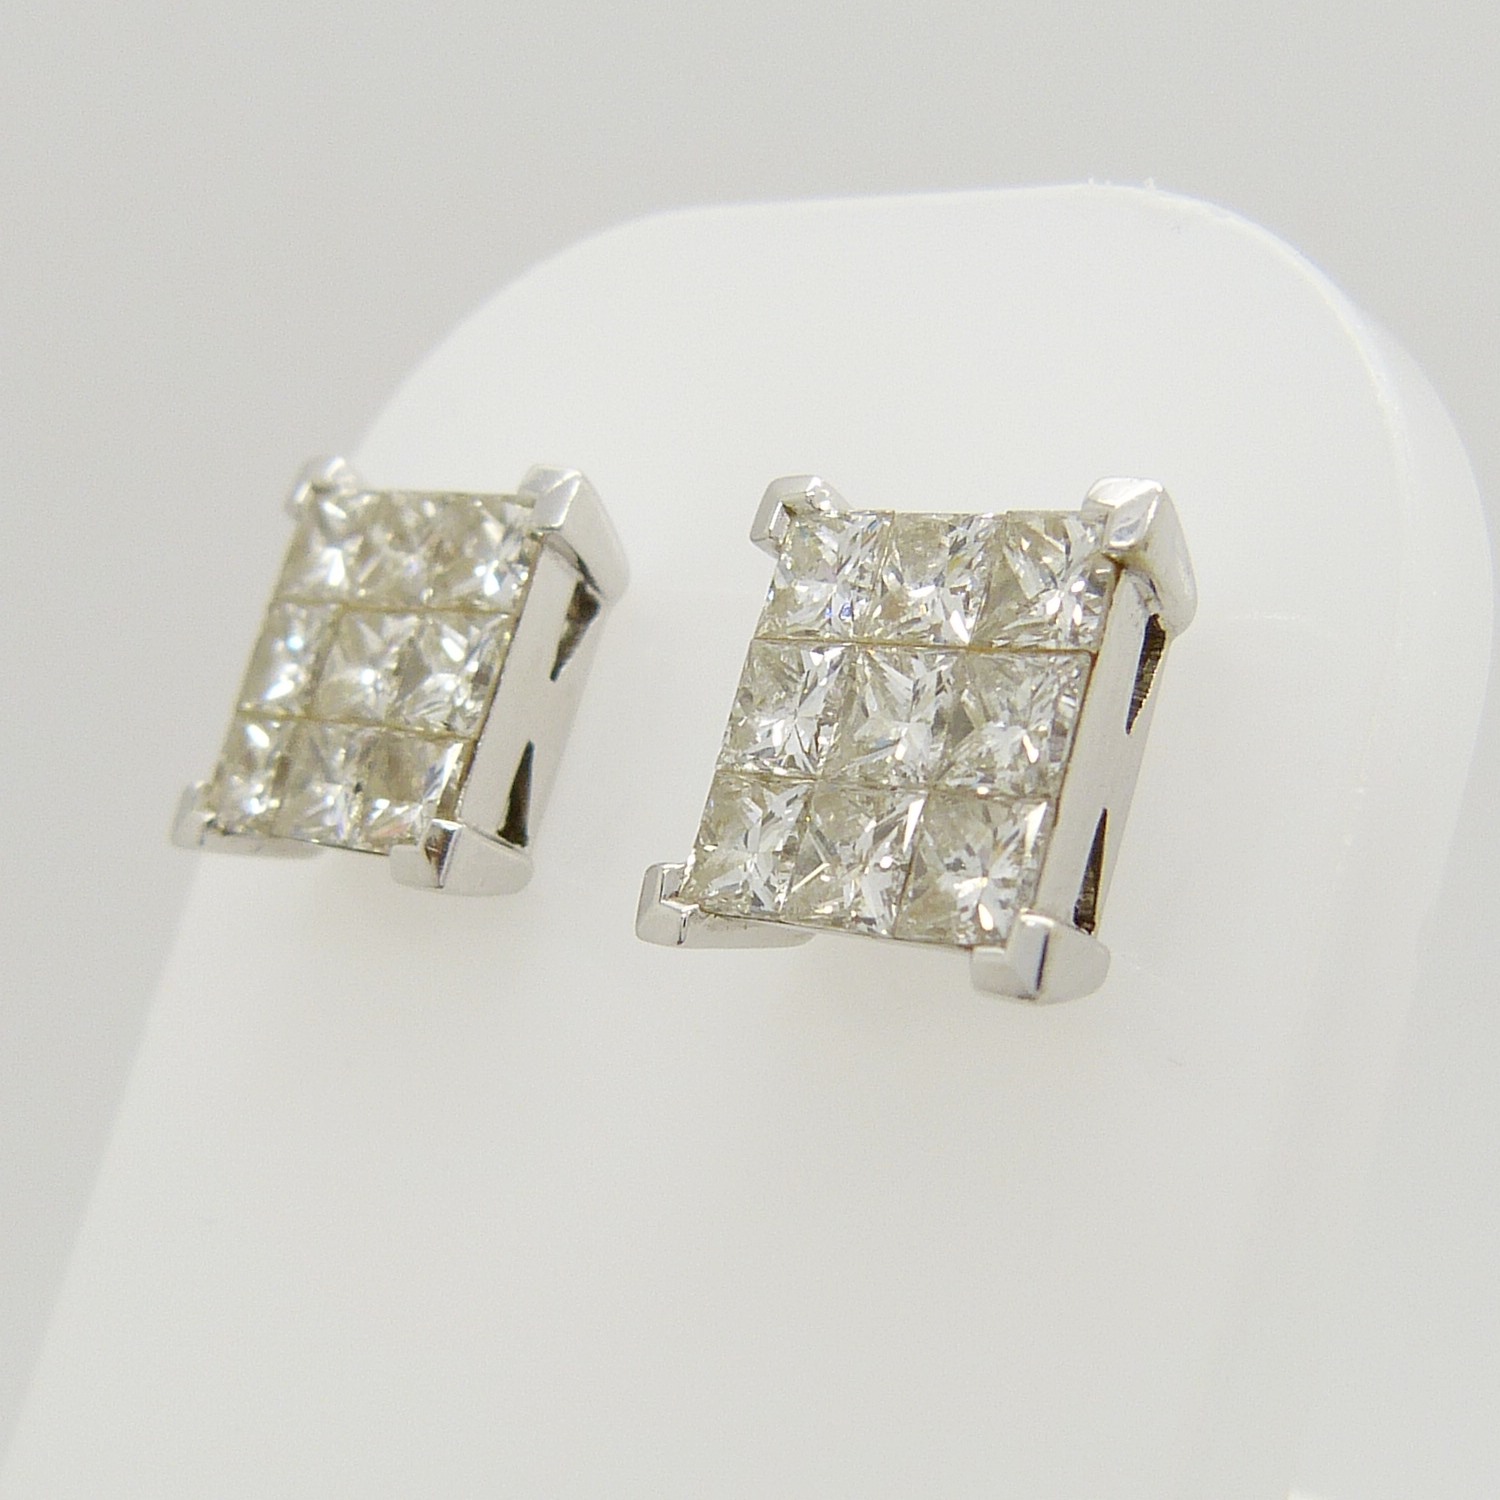 18ct white gold, 2.00 carat (approx) invisible-set princess-cut diamond square cluster stud earrings - Image 2 of 6